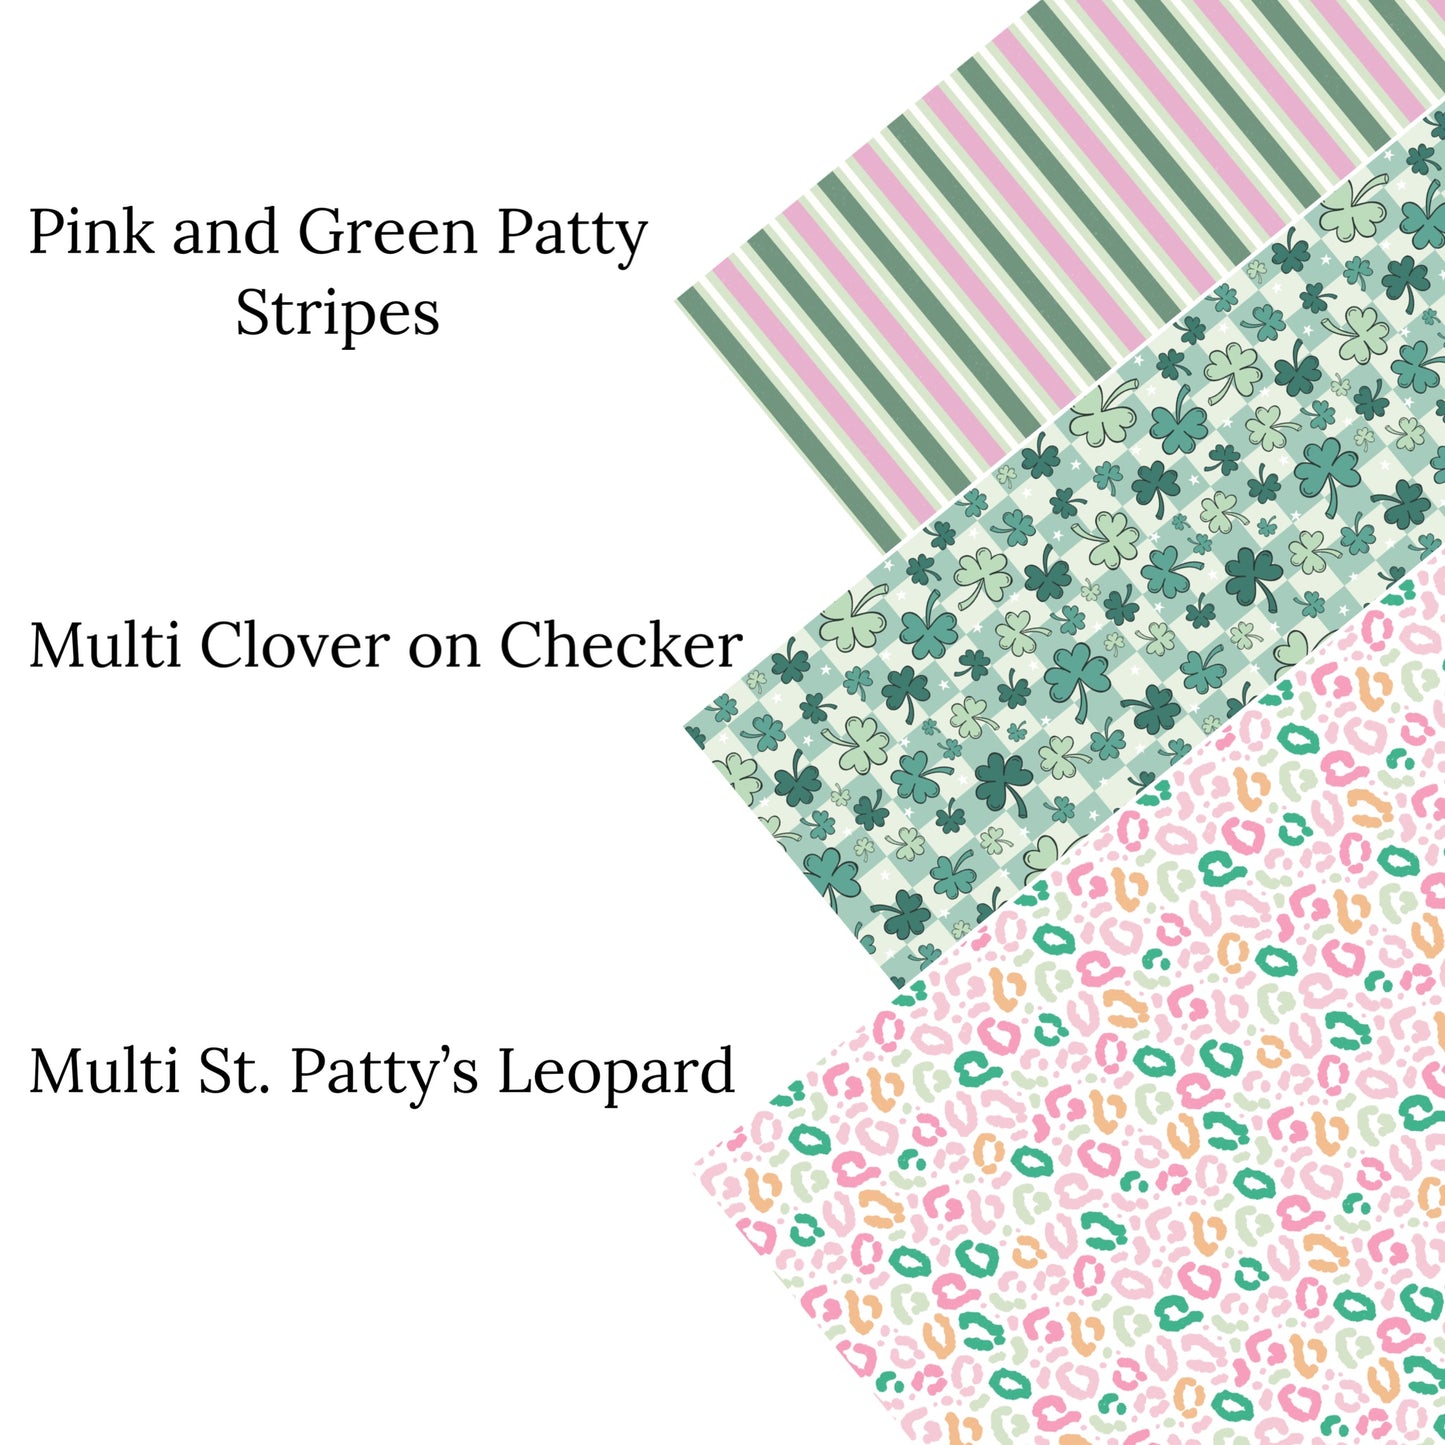 Multi St. Patty’s Leopard Faux Leather Sheets